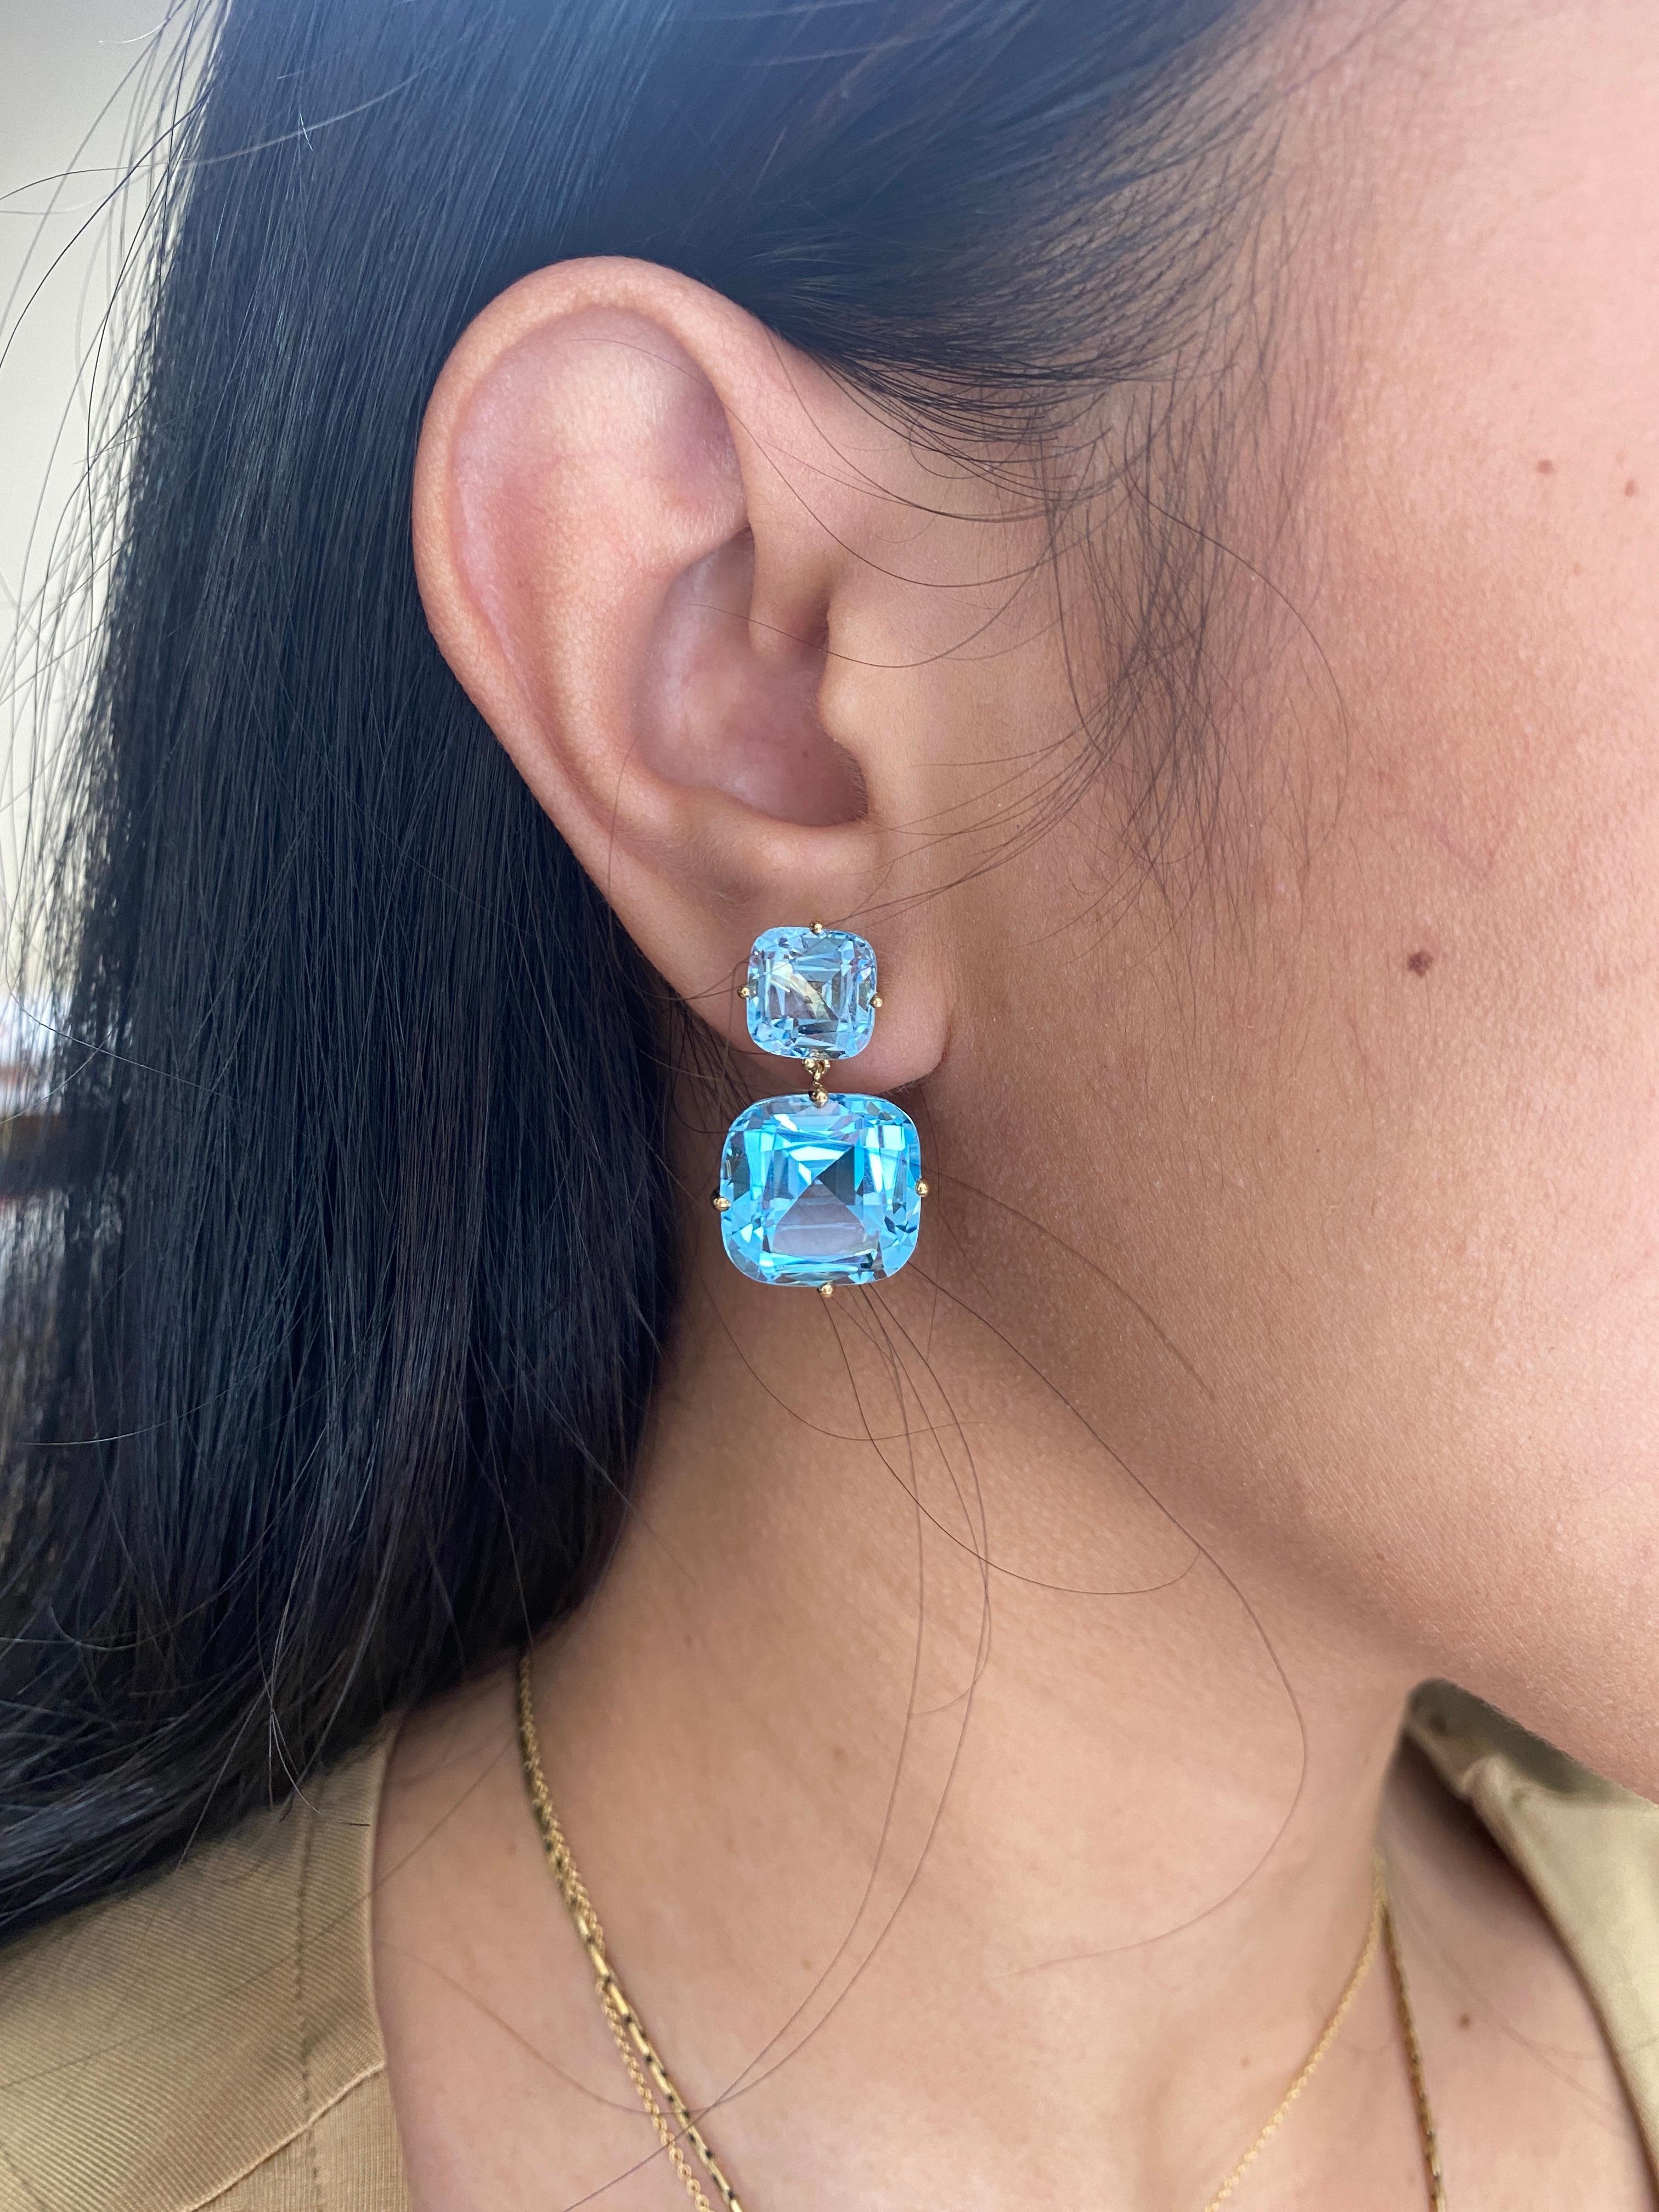 2 Tier Blue Topaz Cushion Earrings in 18k Yellow Gold, from 'Gossip' Collection. Like any good piece of Gossip, this collection carries a hint of shock value. They will have everyone in suspense about what Goshwara will do next.

* Gemstone size: 9